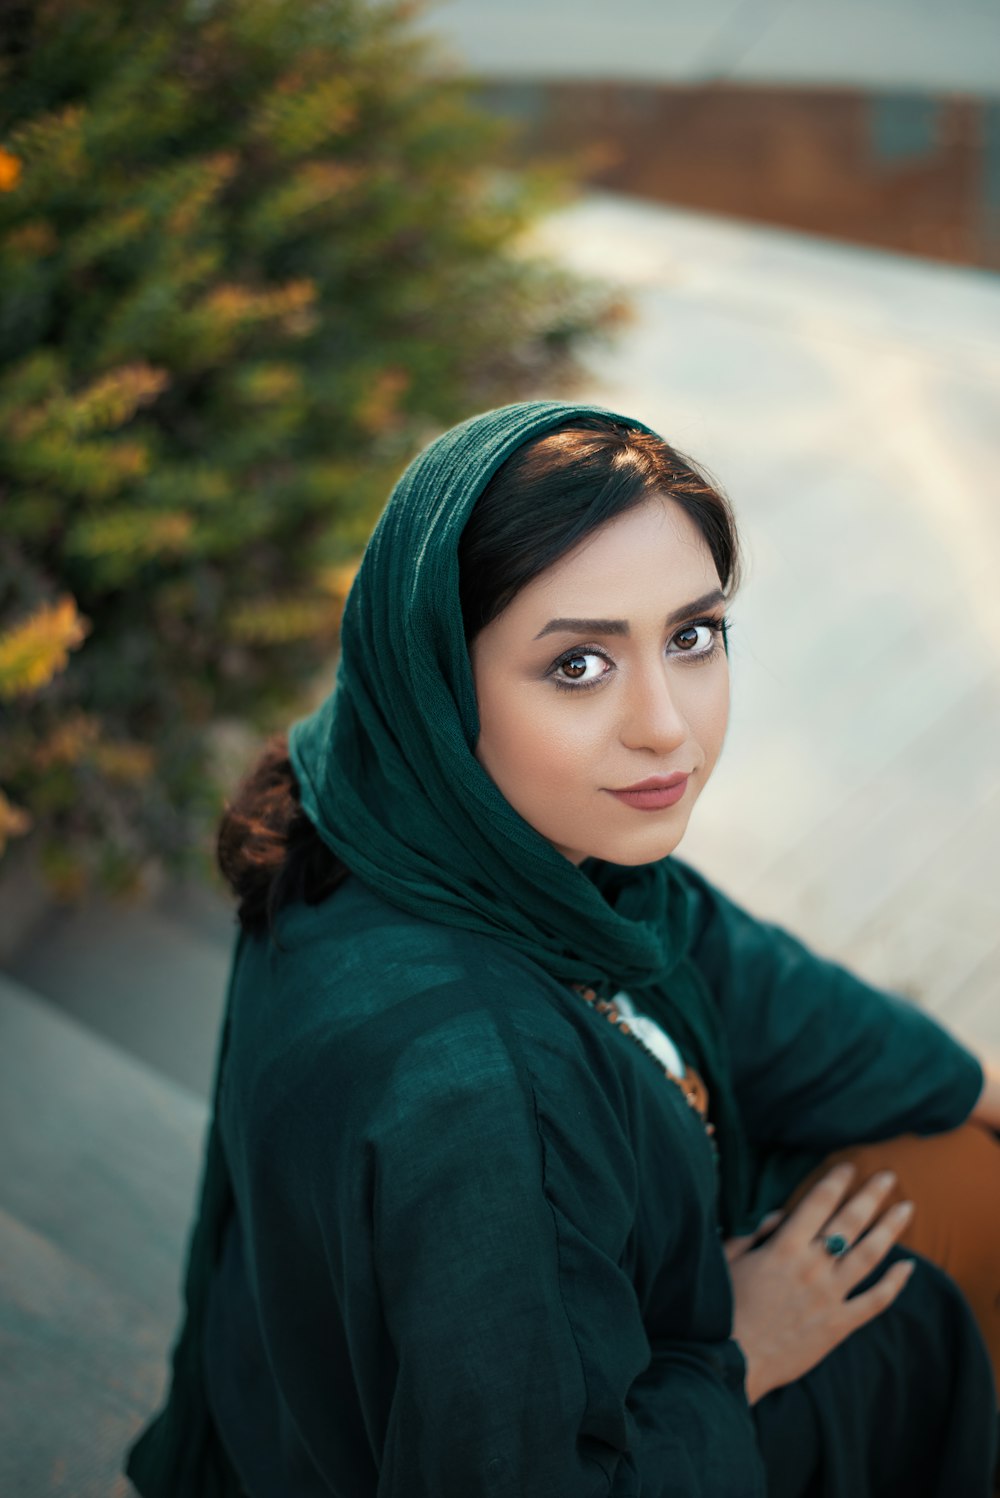 focus photography of woman in green headscarf